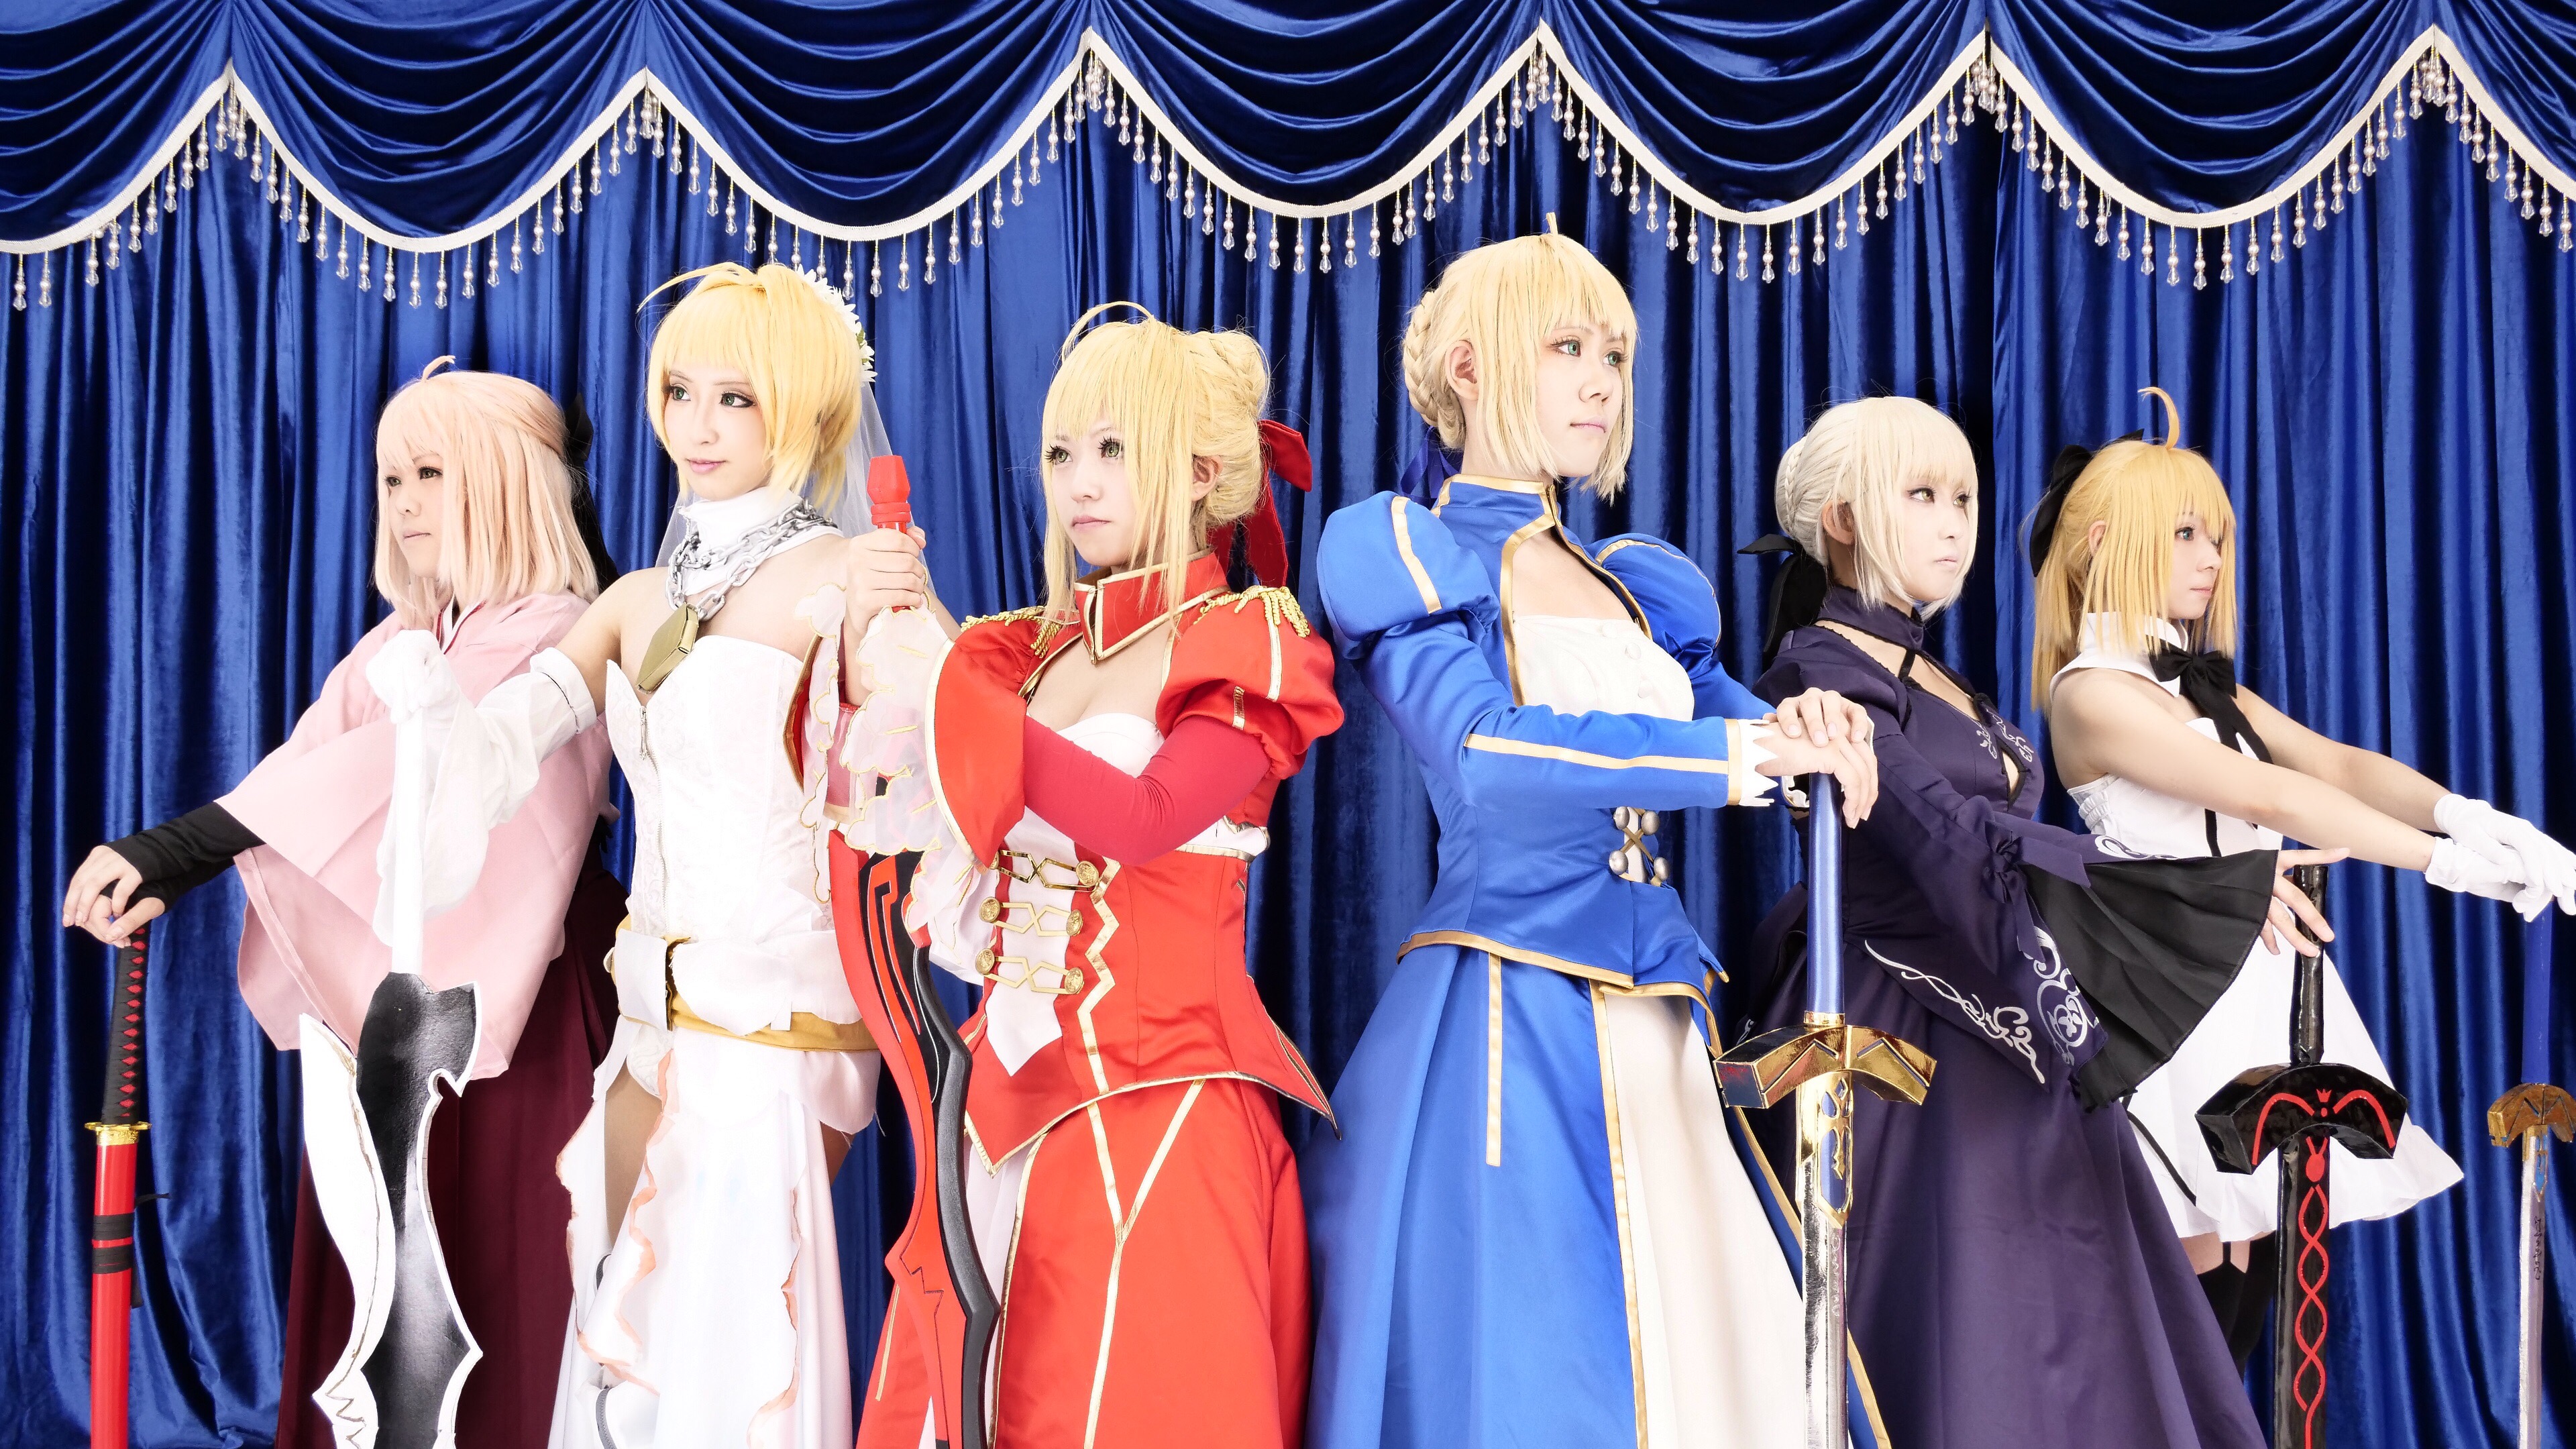 People 3840x2160 Asian Japanese Japanese women women cosplay Fate series Fate/Grand Order Fate/Stay Night fate/stay night: heaven's feel Fate/Unlimited Codes  Fate/Extra Fate/Extra CCC Artoria Pendragon Saber Alter Saber Bride Saber Lily Nero Claudius Okita Souji blonde long hair Excalibur